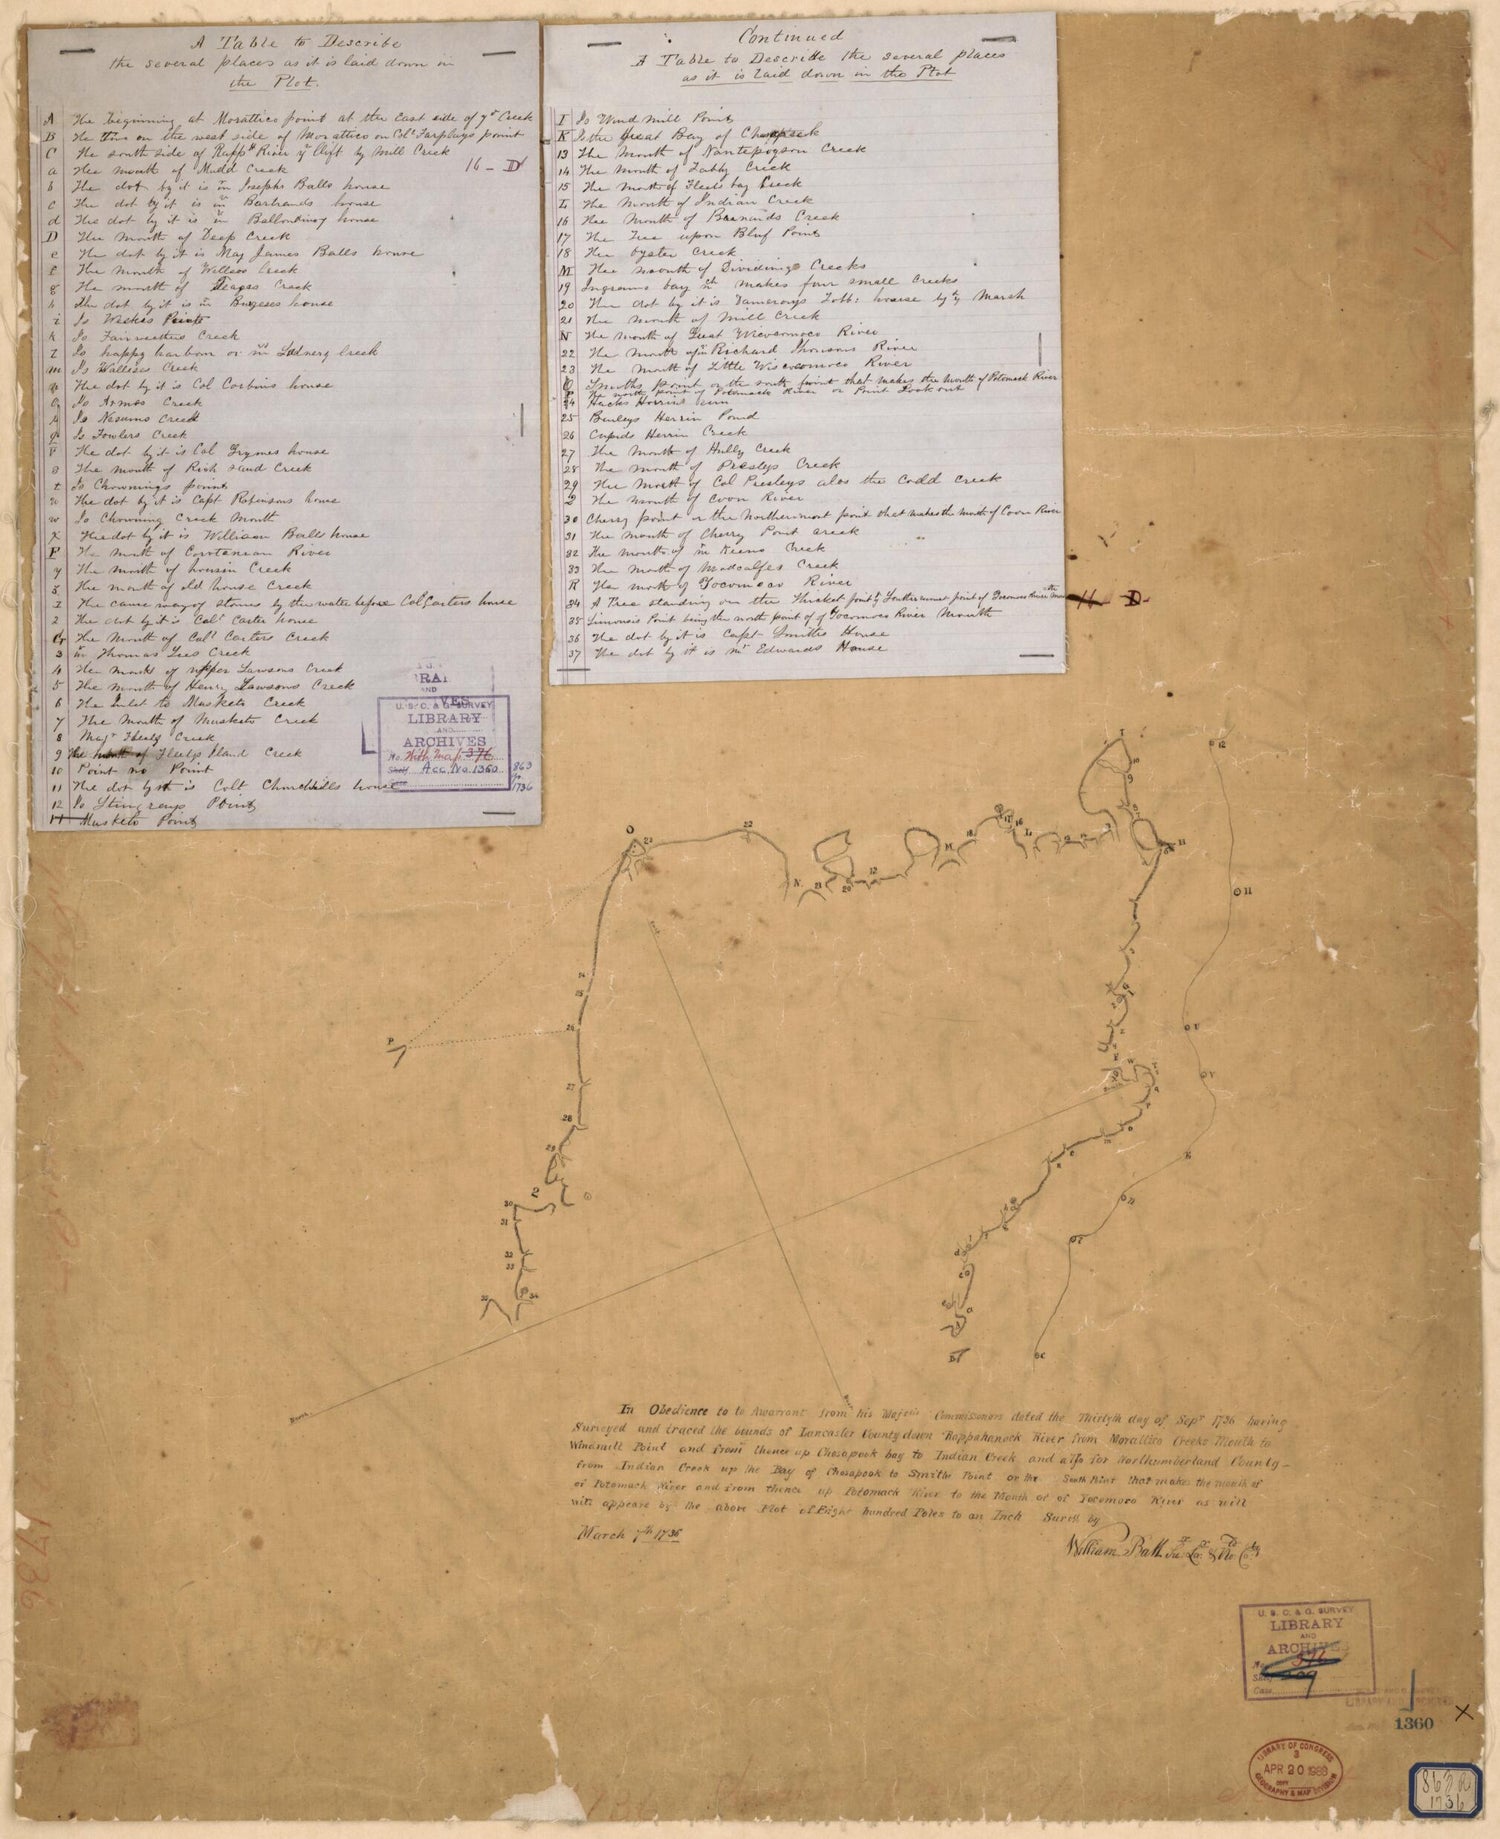 This old map of A Survey of a Plot In Lancaster and Northumberland Counties Bounded by the Chesapeake Bay, Rappahnnock River, and the Potomac River  from 1736 was created by William Ball in 1736